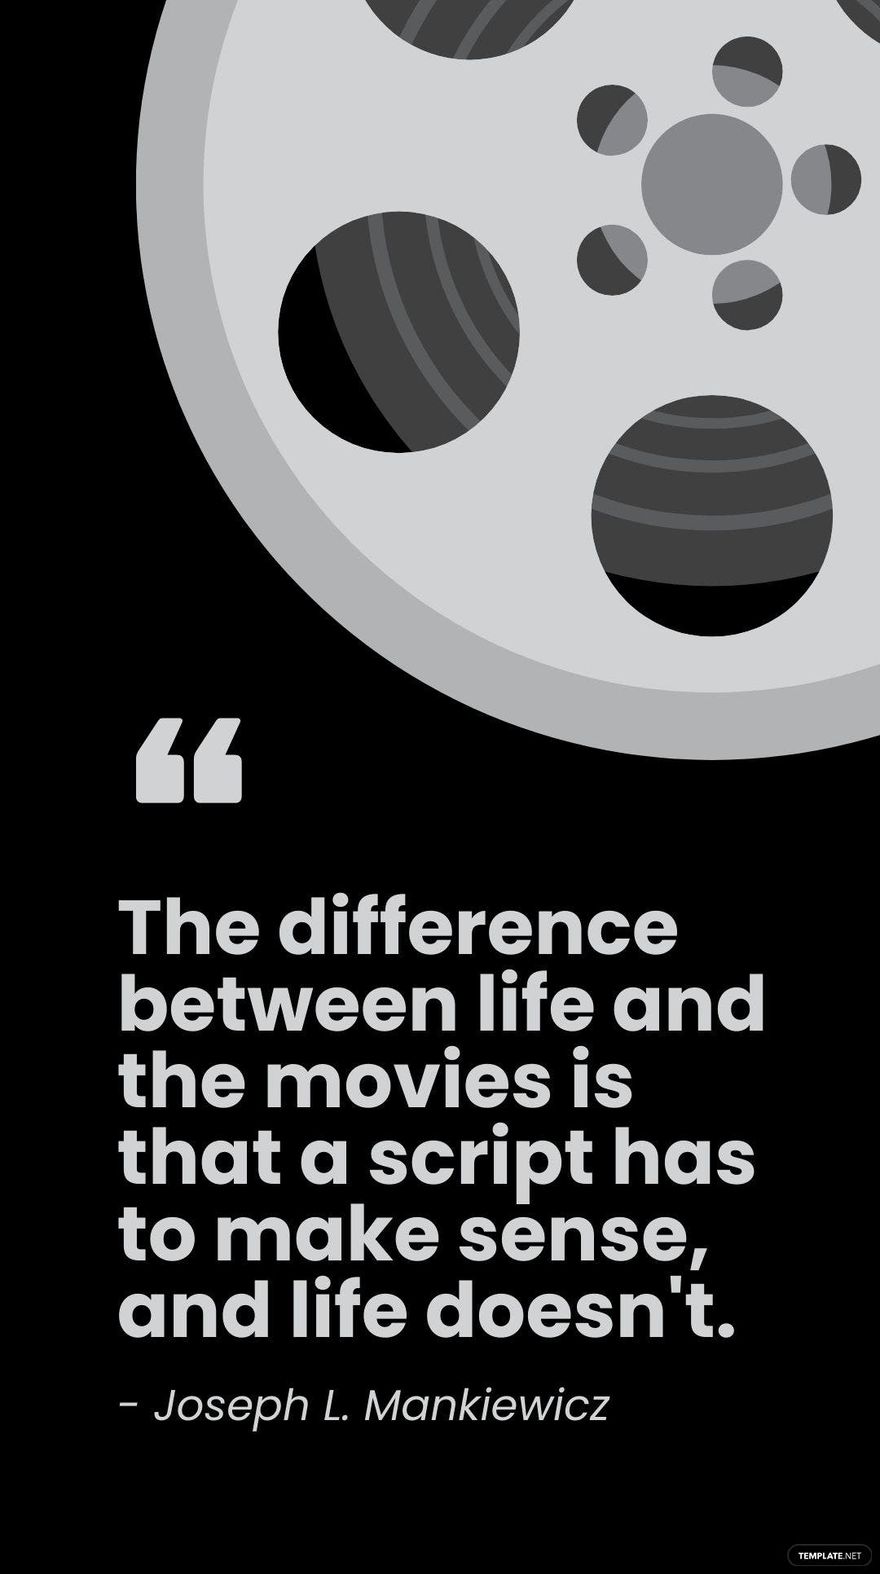 Joseph L. Mankiewicz - The difference between life and the movies is that a script has to make sense, and life doesn't.